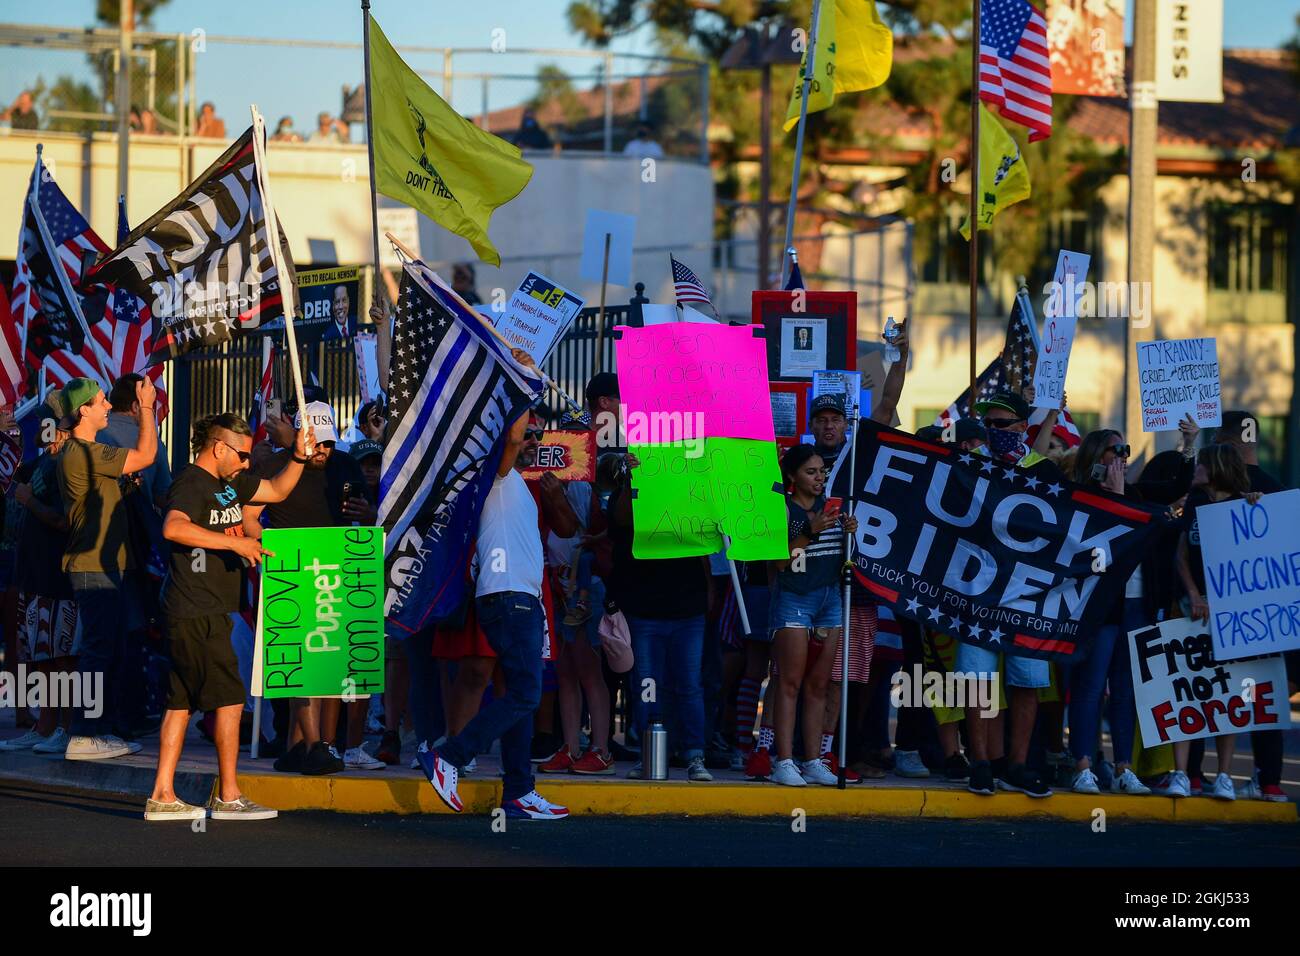 Demonstrators gather near Long Beach City College to protest a Vote No rally for Gavin Newsom, attended by President Joe Biden, Monday, Sept. 13, 2021 Stock Photo